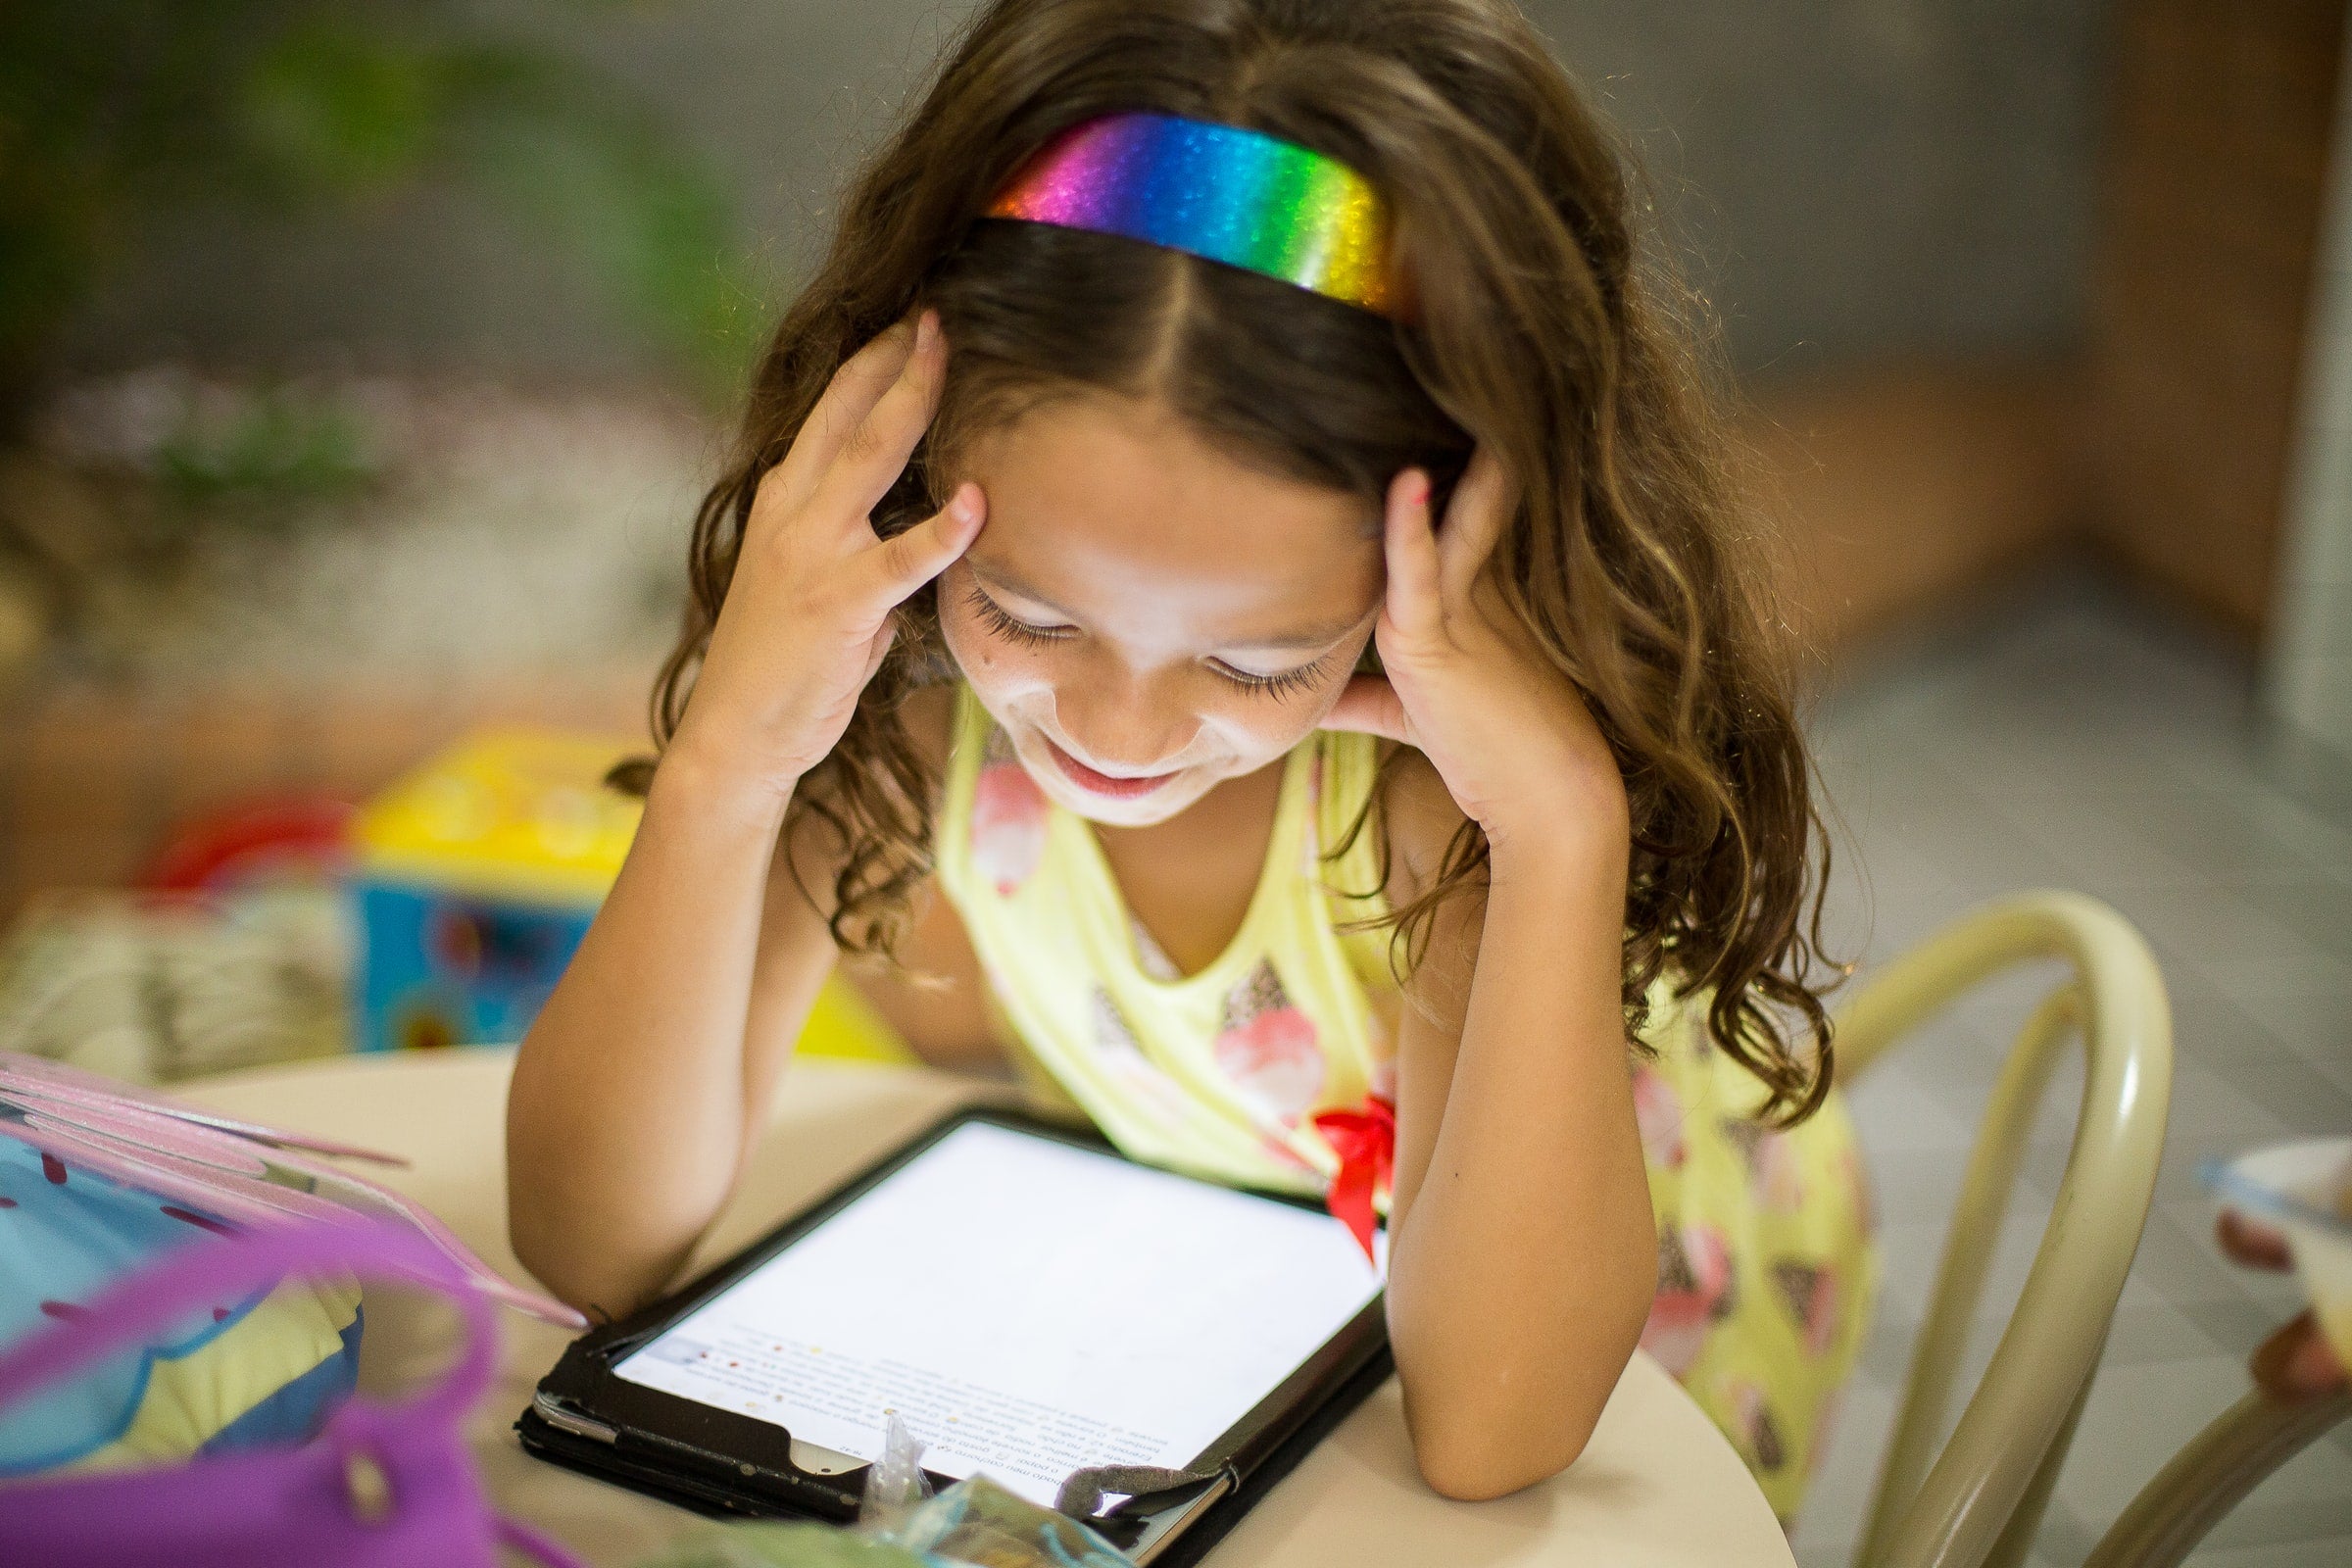 little girl with rainbow headband watching tv on a tablet. image by Patricia Prudente on unsplash